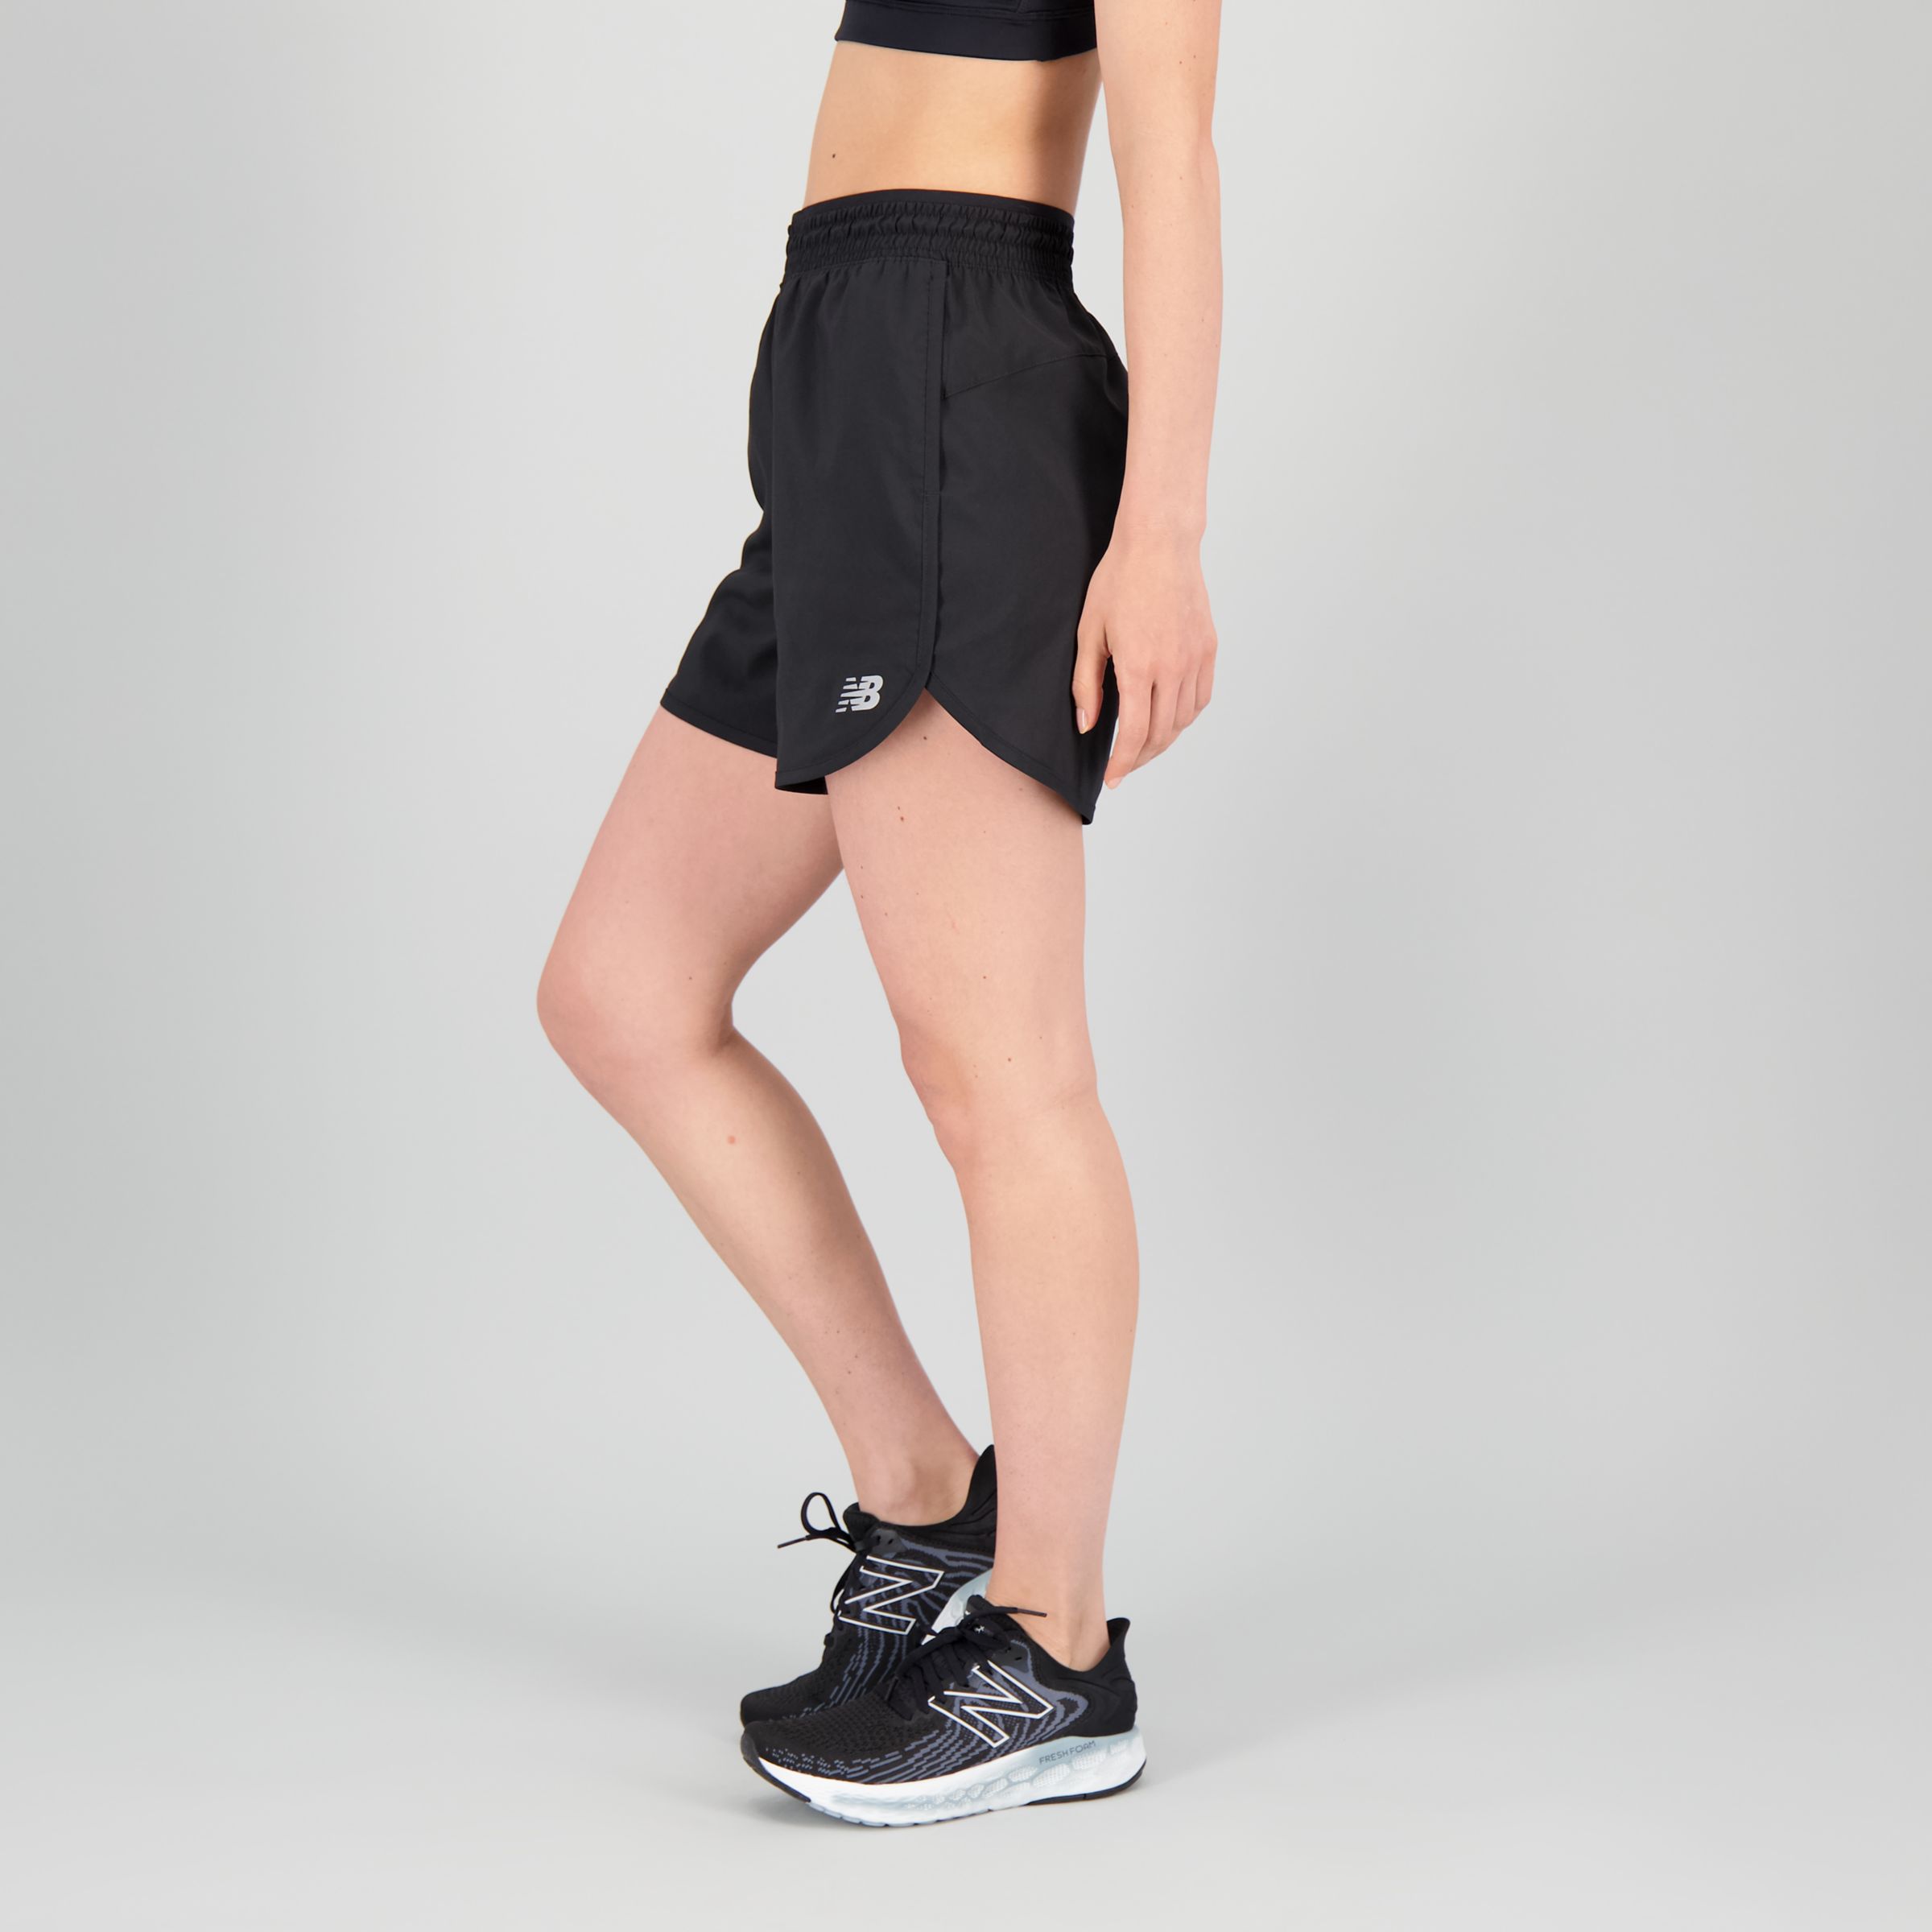 New Balance Running Accelerate 2 in 1 shorts in black